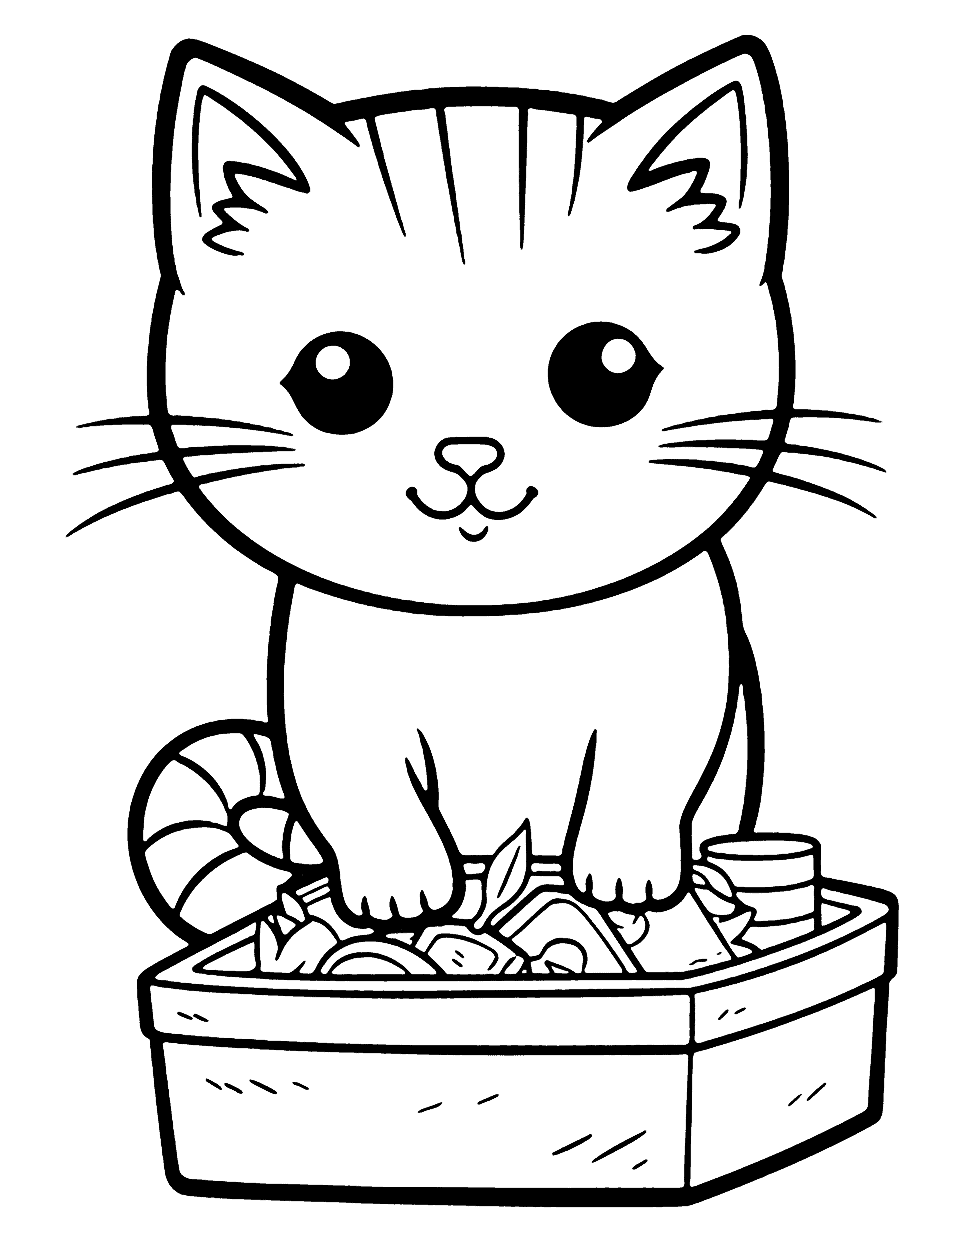 Kawaii Cat With a Bento Box Coloring Page - A kawaii cat eagerly opening a bento box full of delicious food.